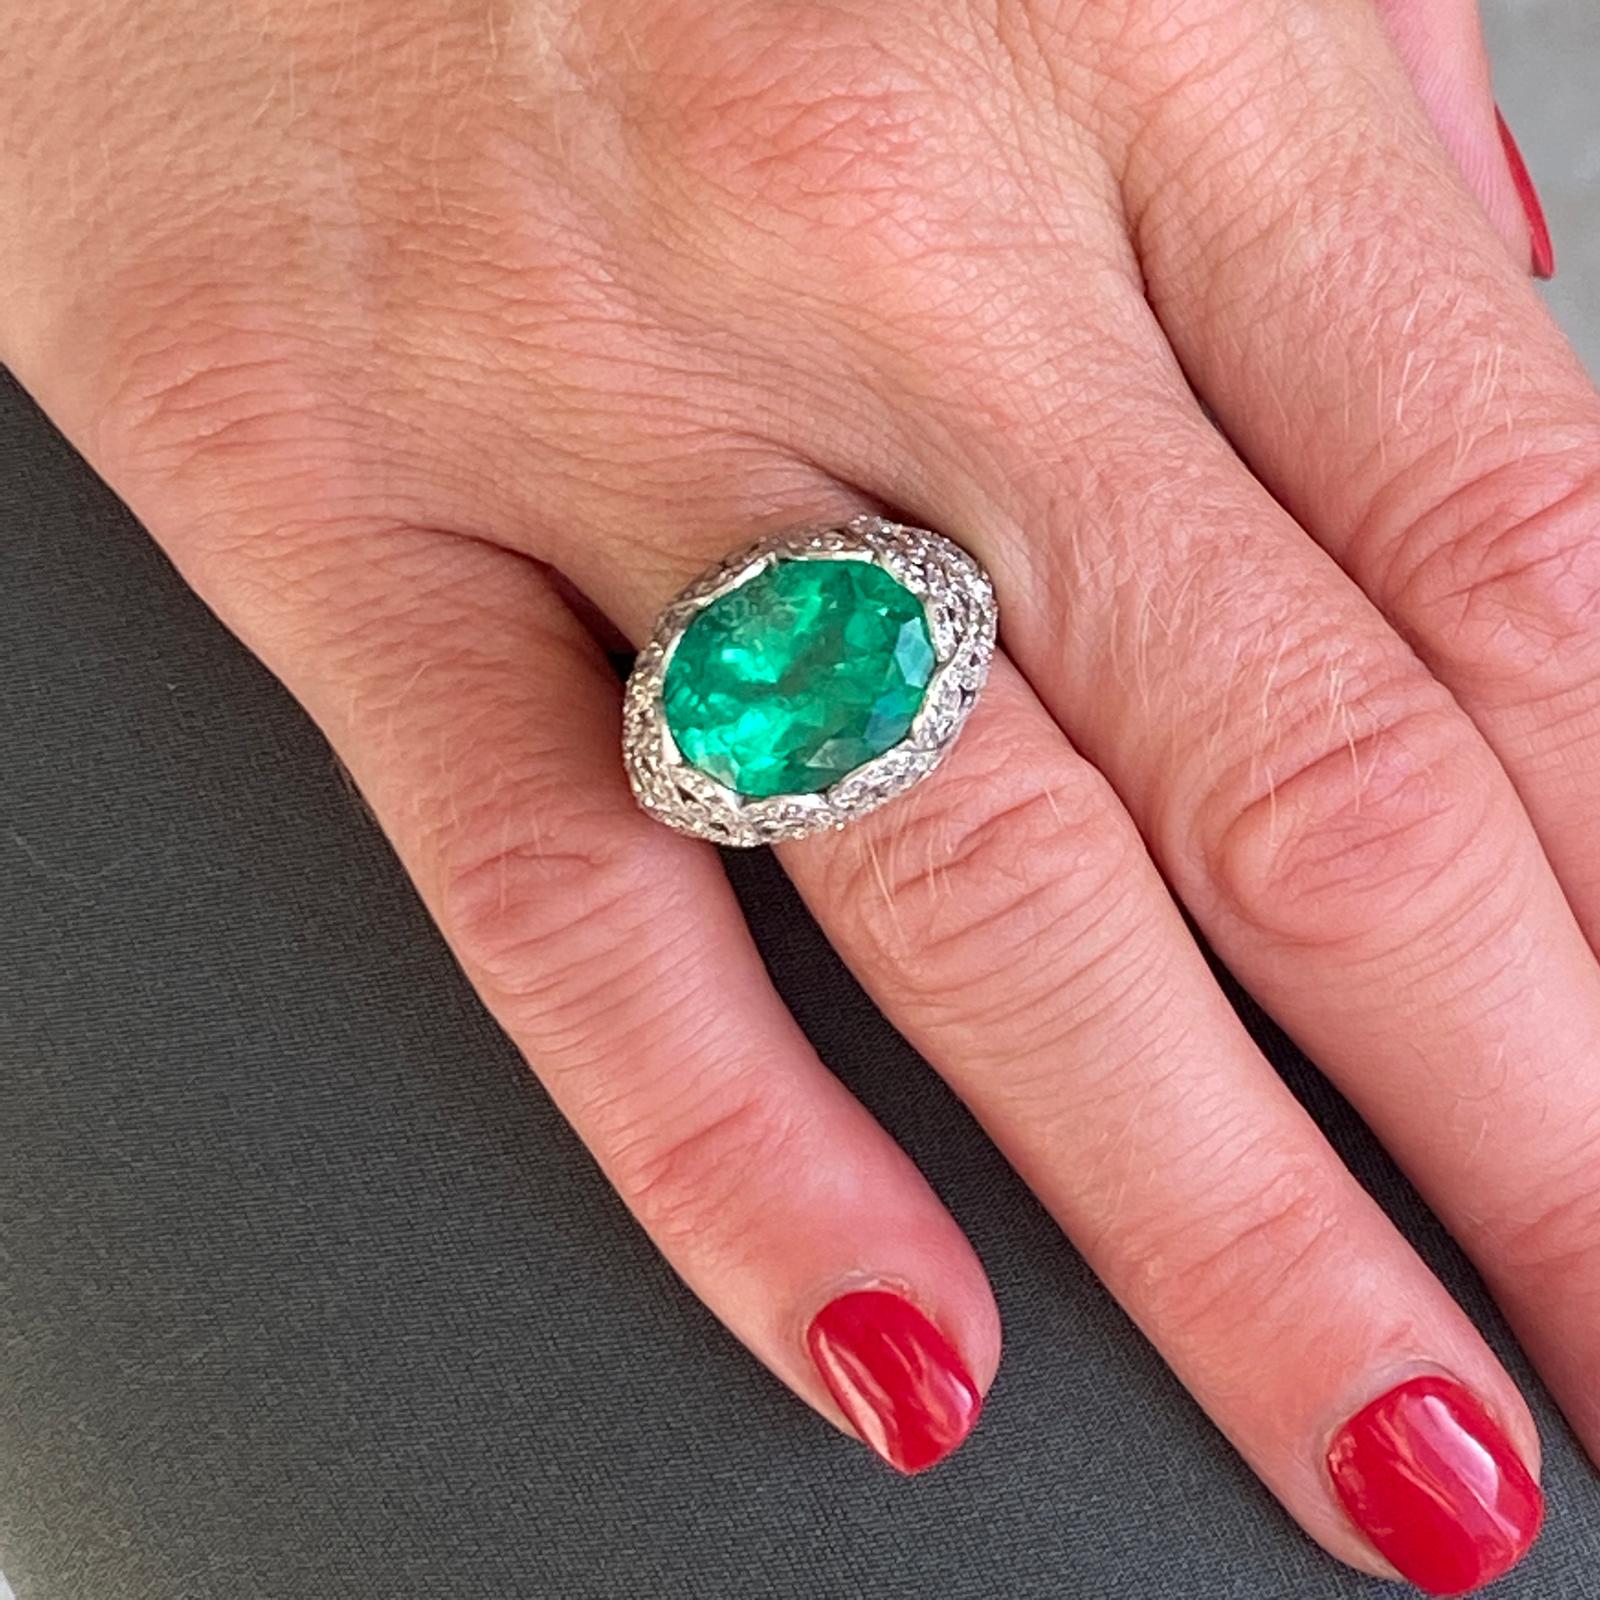 Stunning emerald diamond cocktail ring fashioned in platinum. The 8.18 carat oval Columbian Emerald is certified by the AGL (certificate included in the photos). The emerald is set in an Art Deco inspired mounting featuing Old European and rose cut